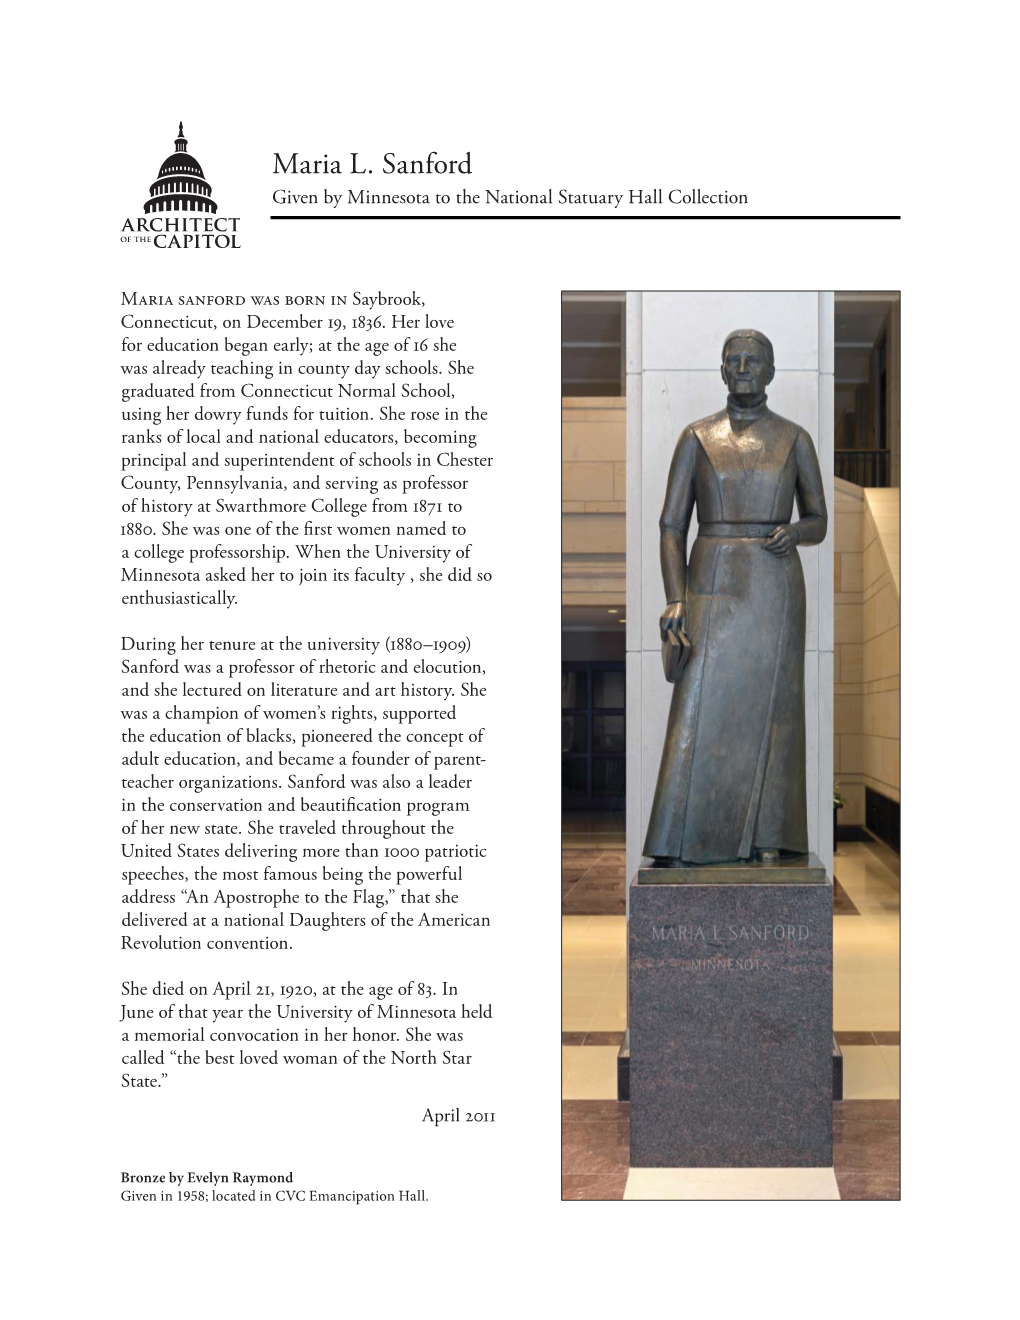 Maria L. Sanford Given by Minnesota to the National Statuary Hall Collection